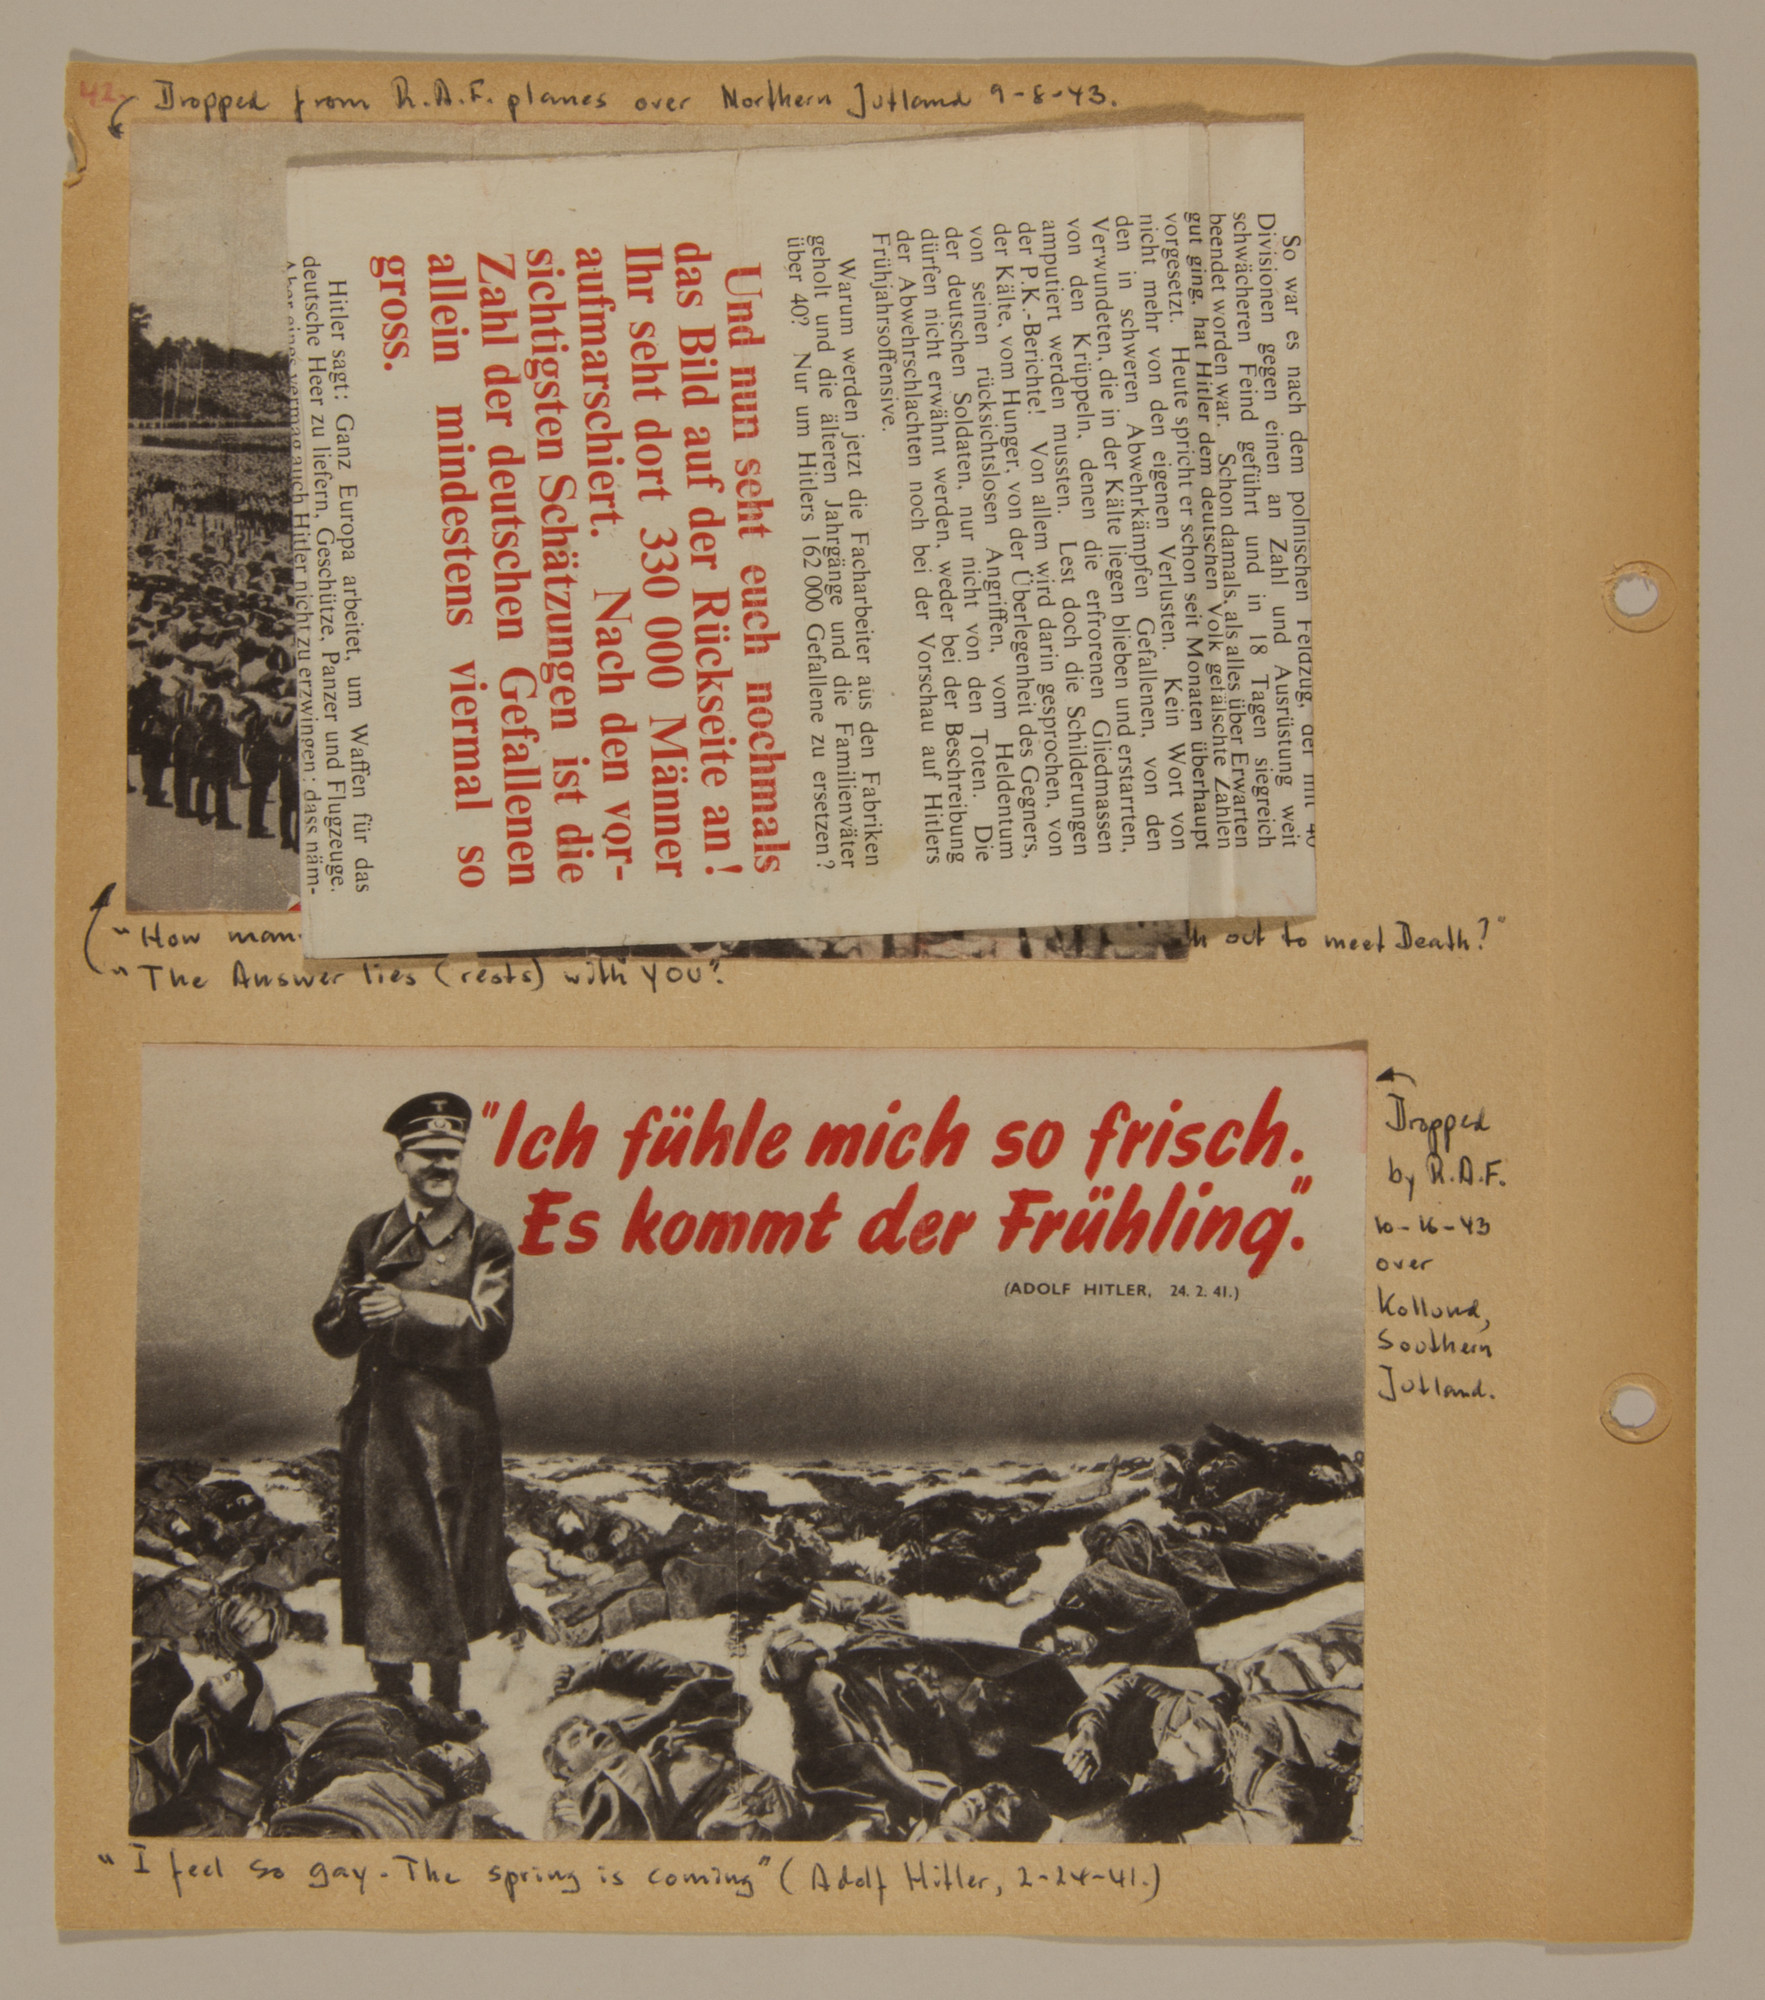 Page from volume two of a set of scrapbooks compiled by Bjorn Sibbern, a Danish policeman and resistance member, documenting the German occupation of Denmark.

This page contains anti-Nazi handbills air-dropped over Denmark.